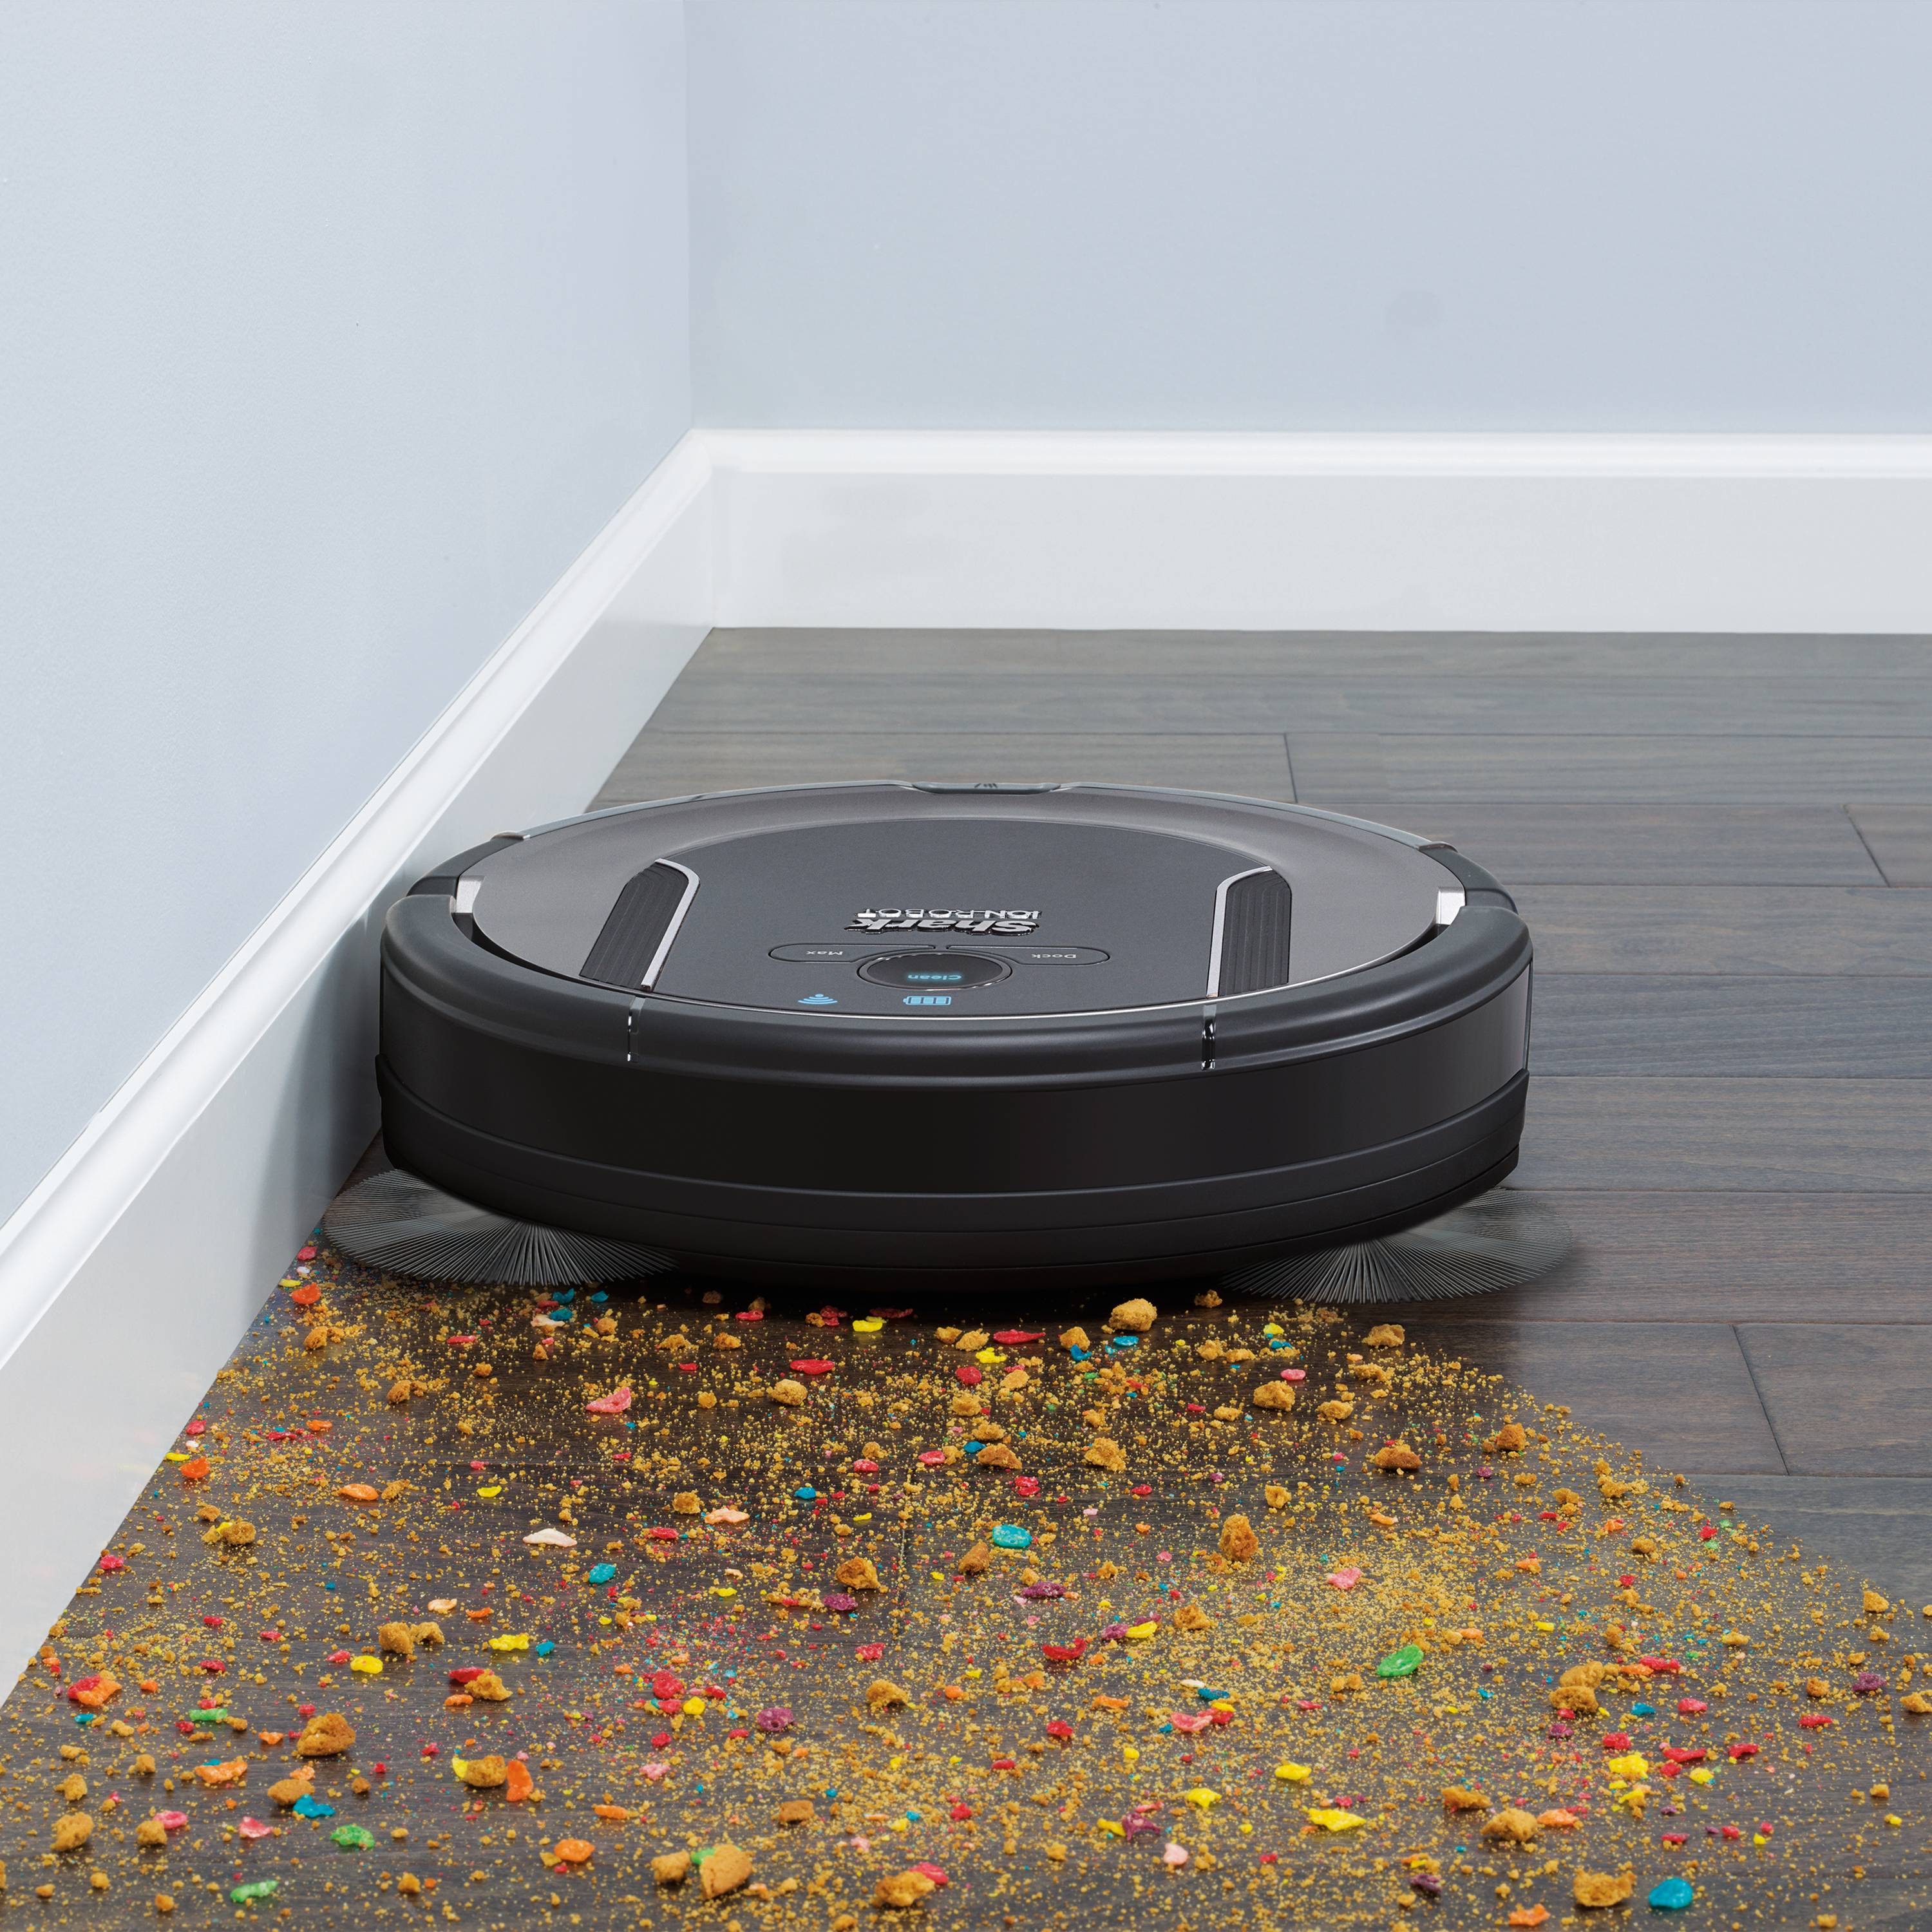 SHARK ION Robot Vacuum Cleaning System with Detachable Hand Vacuum, S86 with Wi-Fi - RV850WV - image 5 of 10